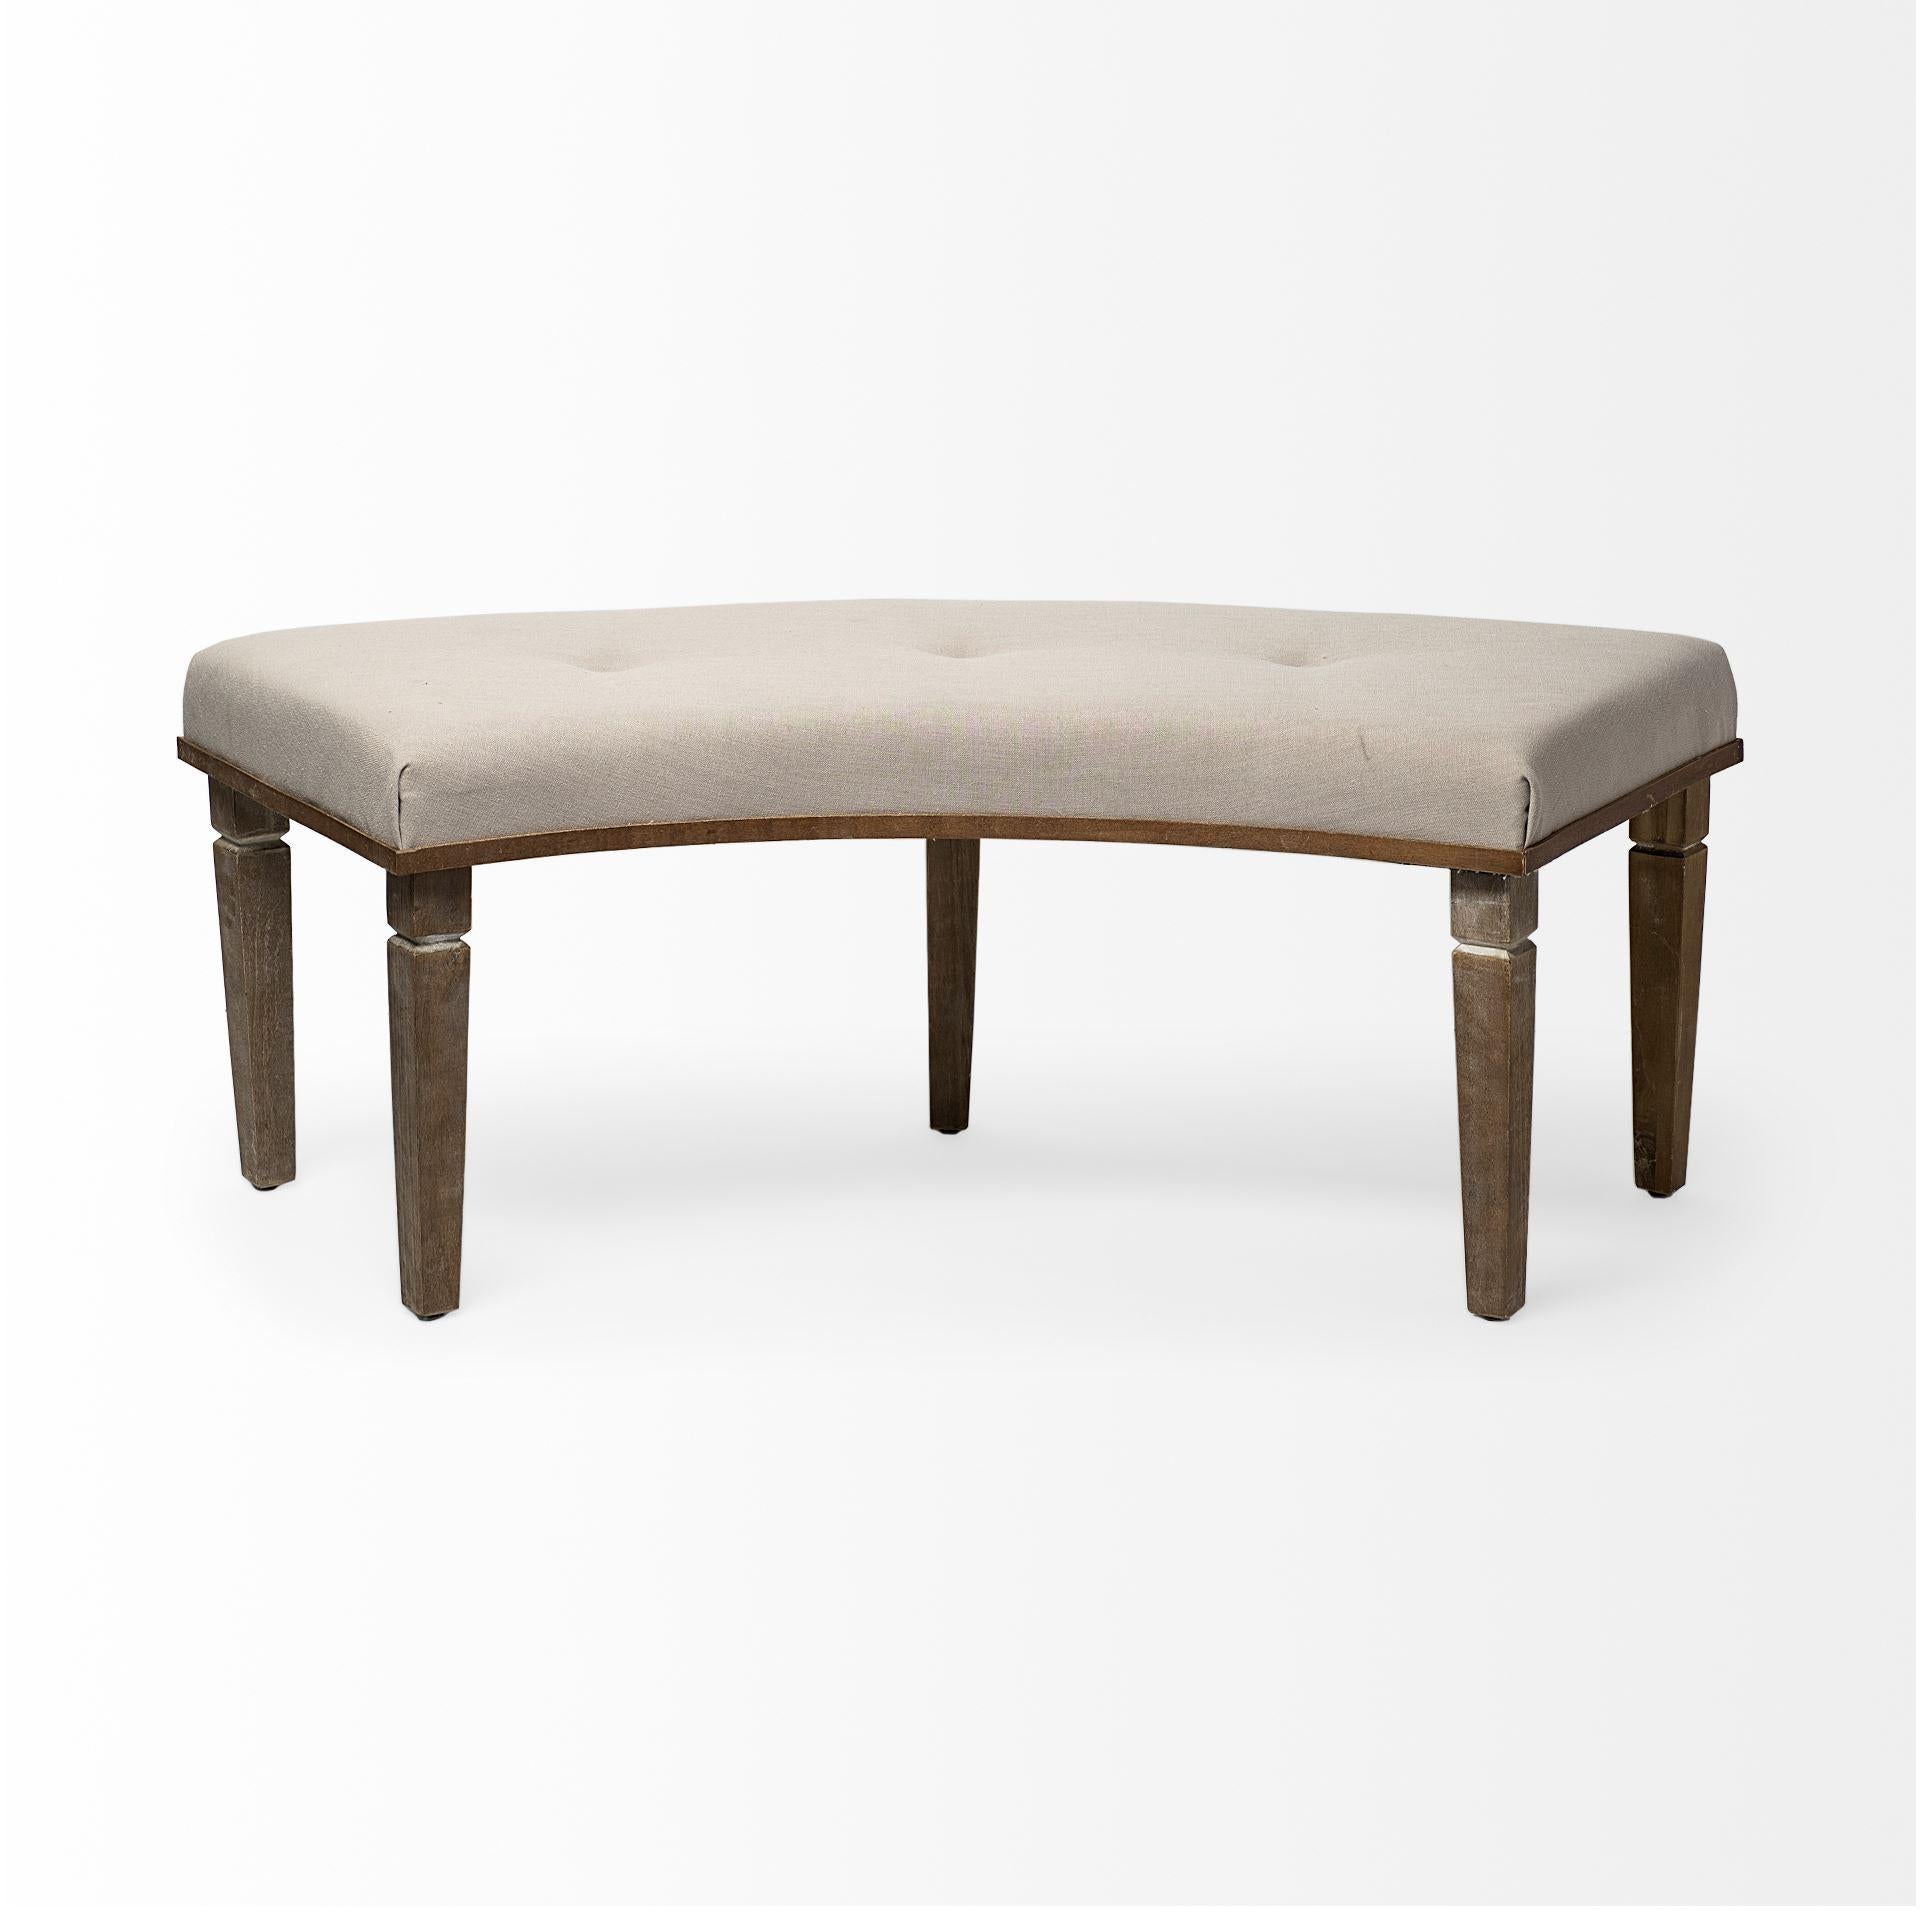 Solid Wood Curved Beige Upholstered Bench